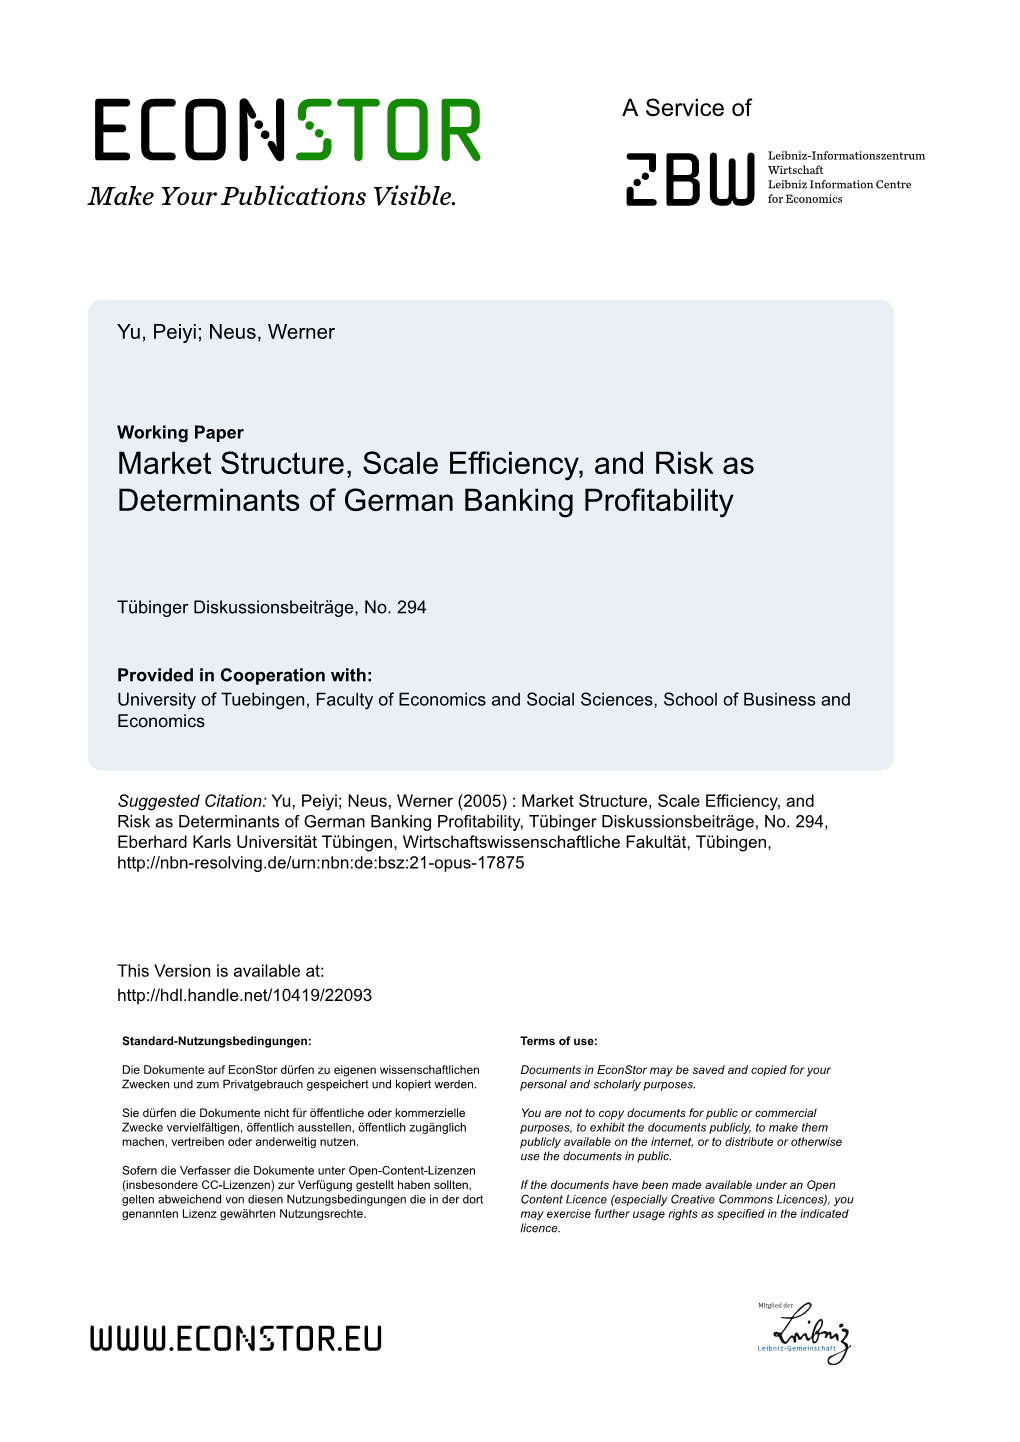 Market Structure, Scale Efficiency, and Risk As Determinants of German Banking Profitability